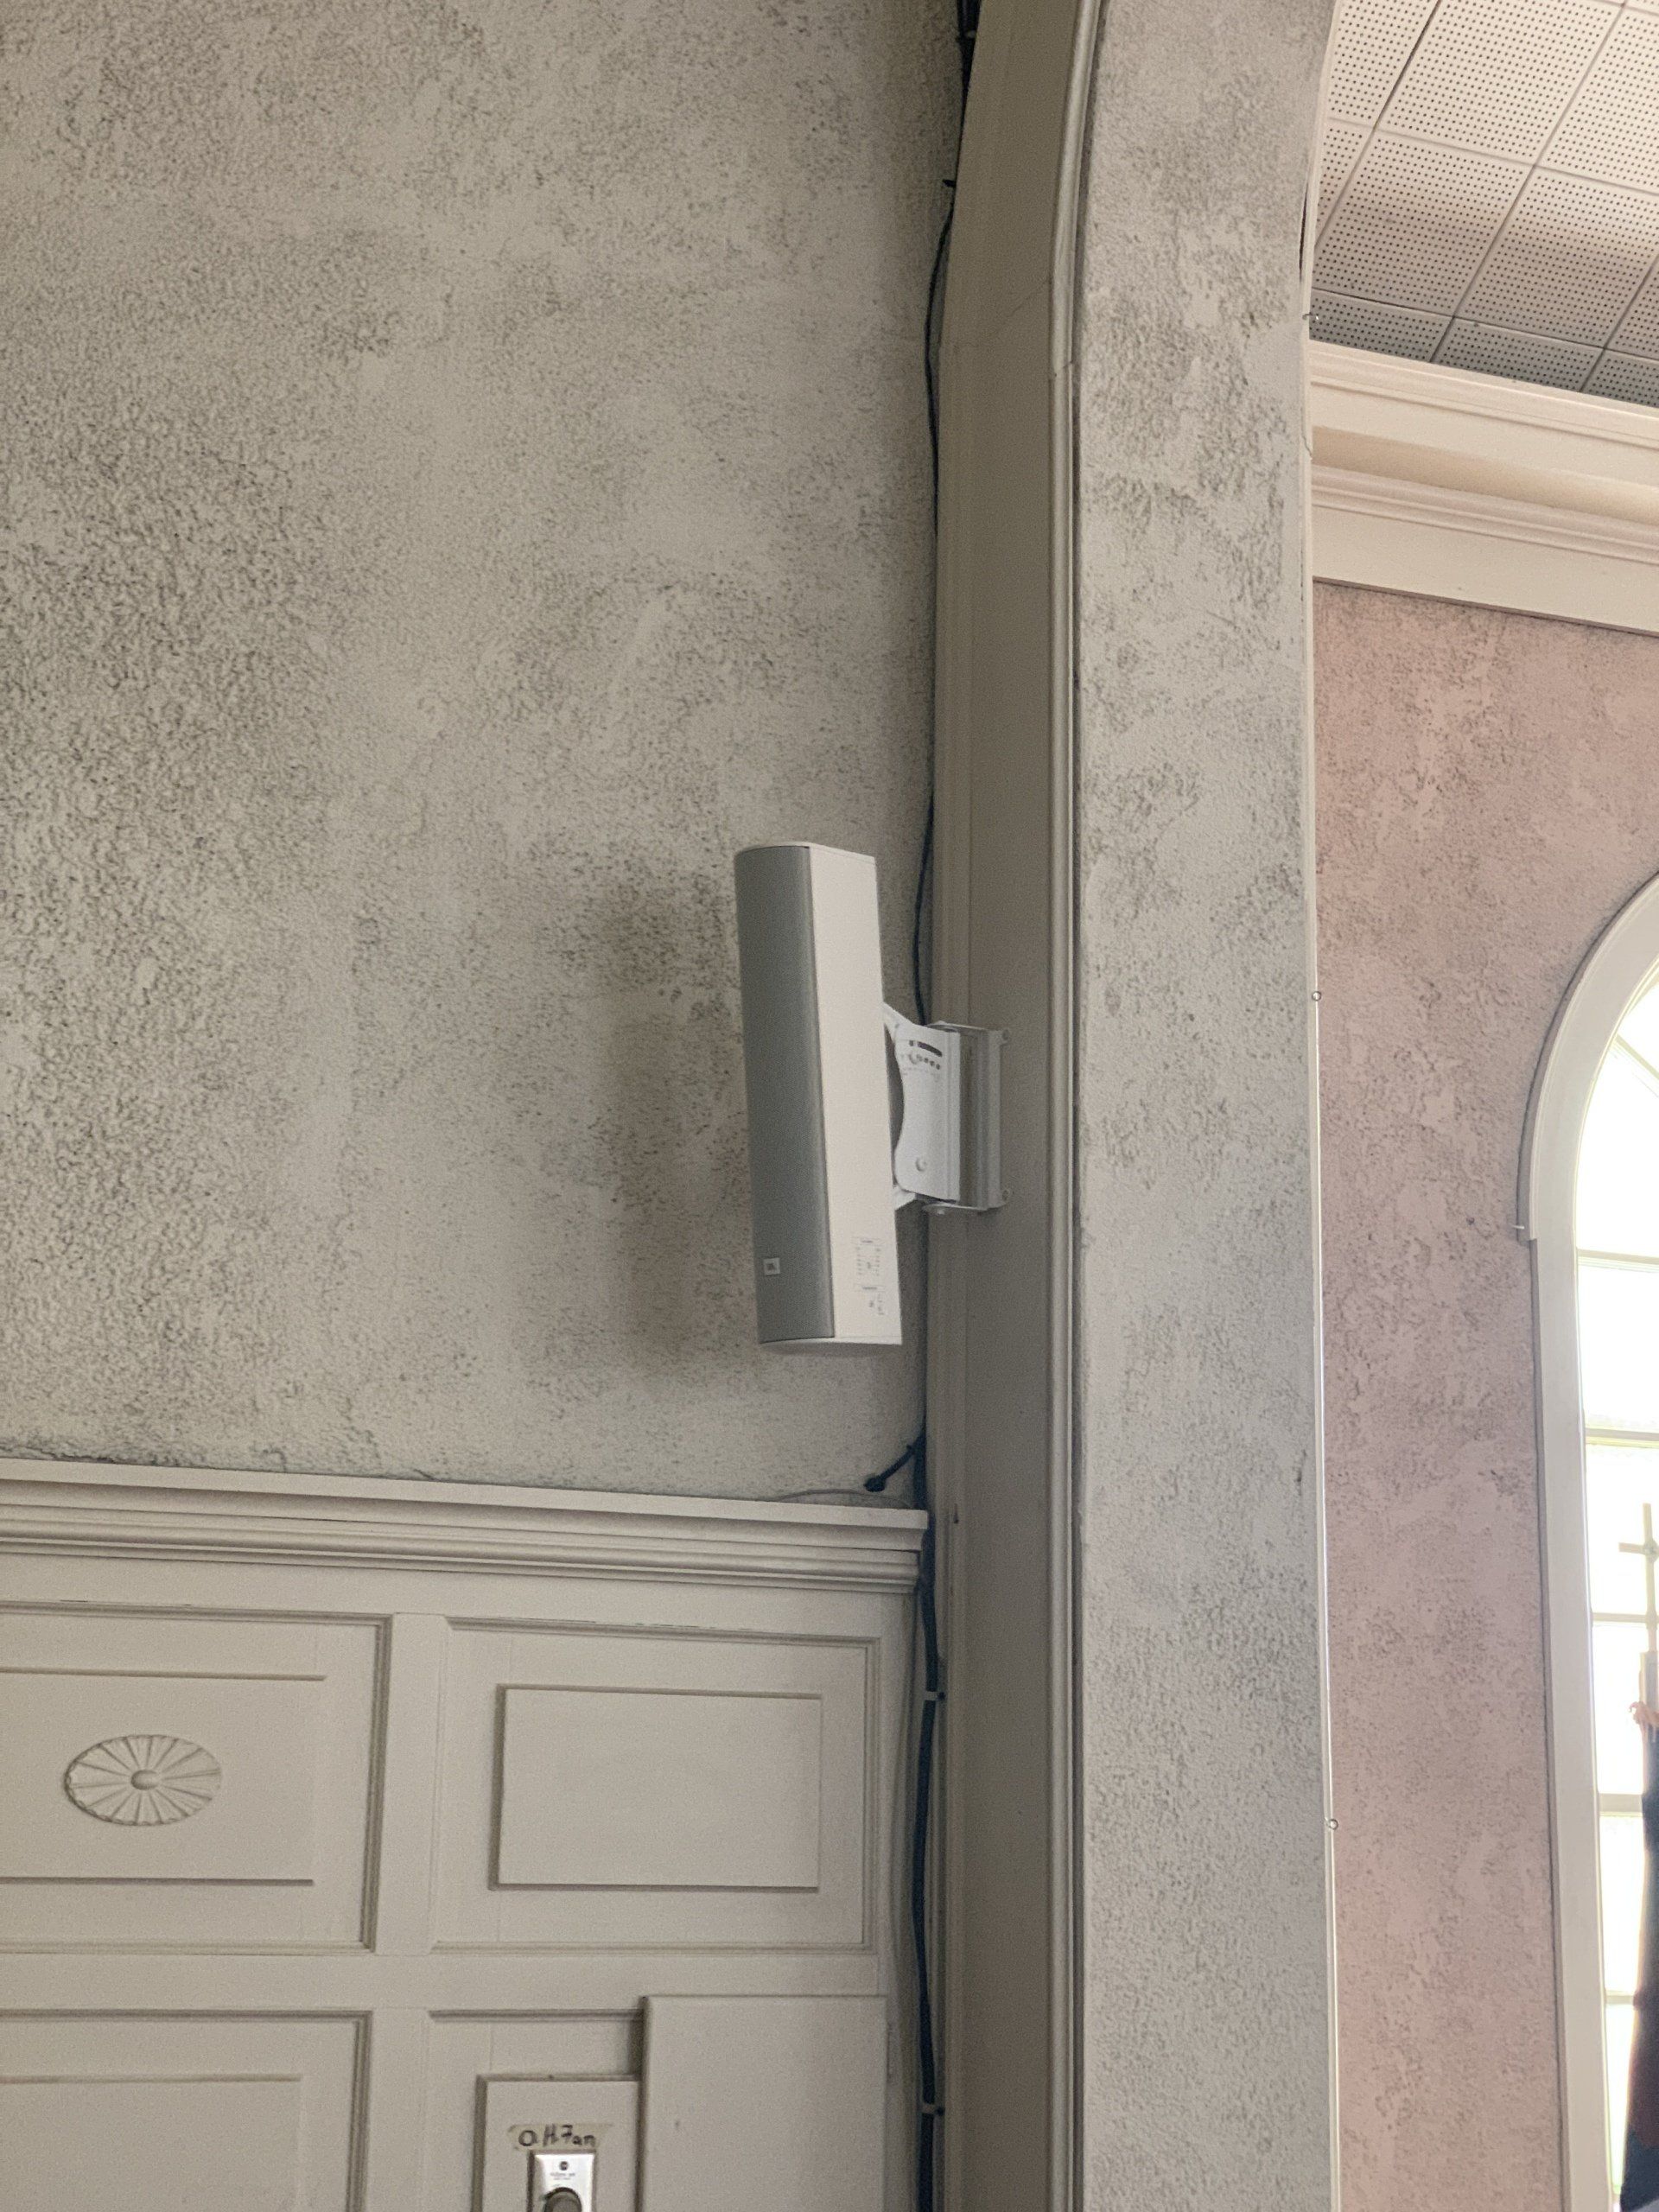 A white speaker is mounted to a wall next to a door